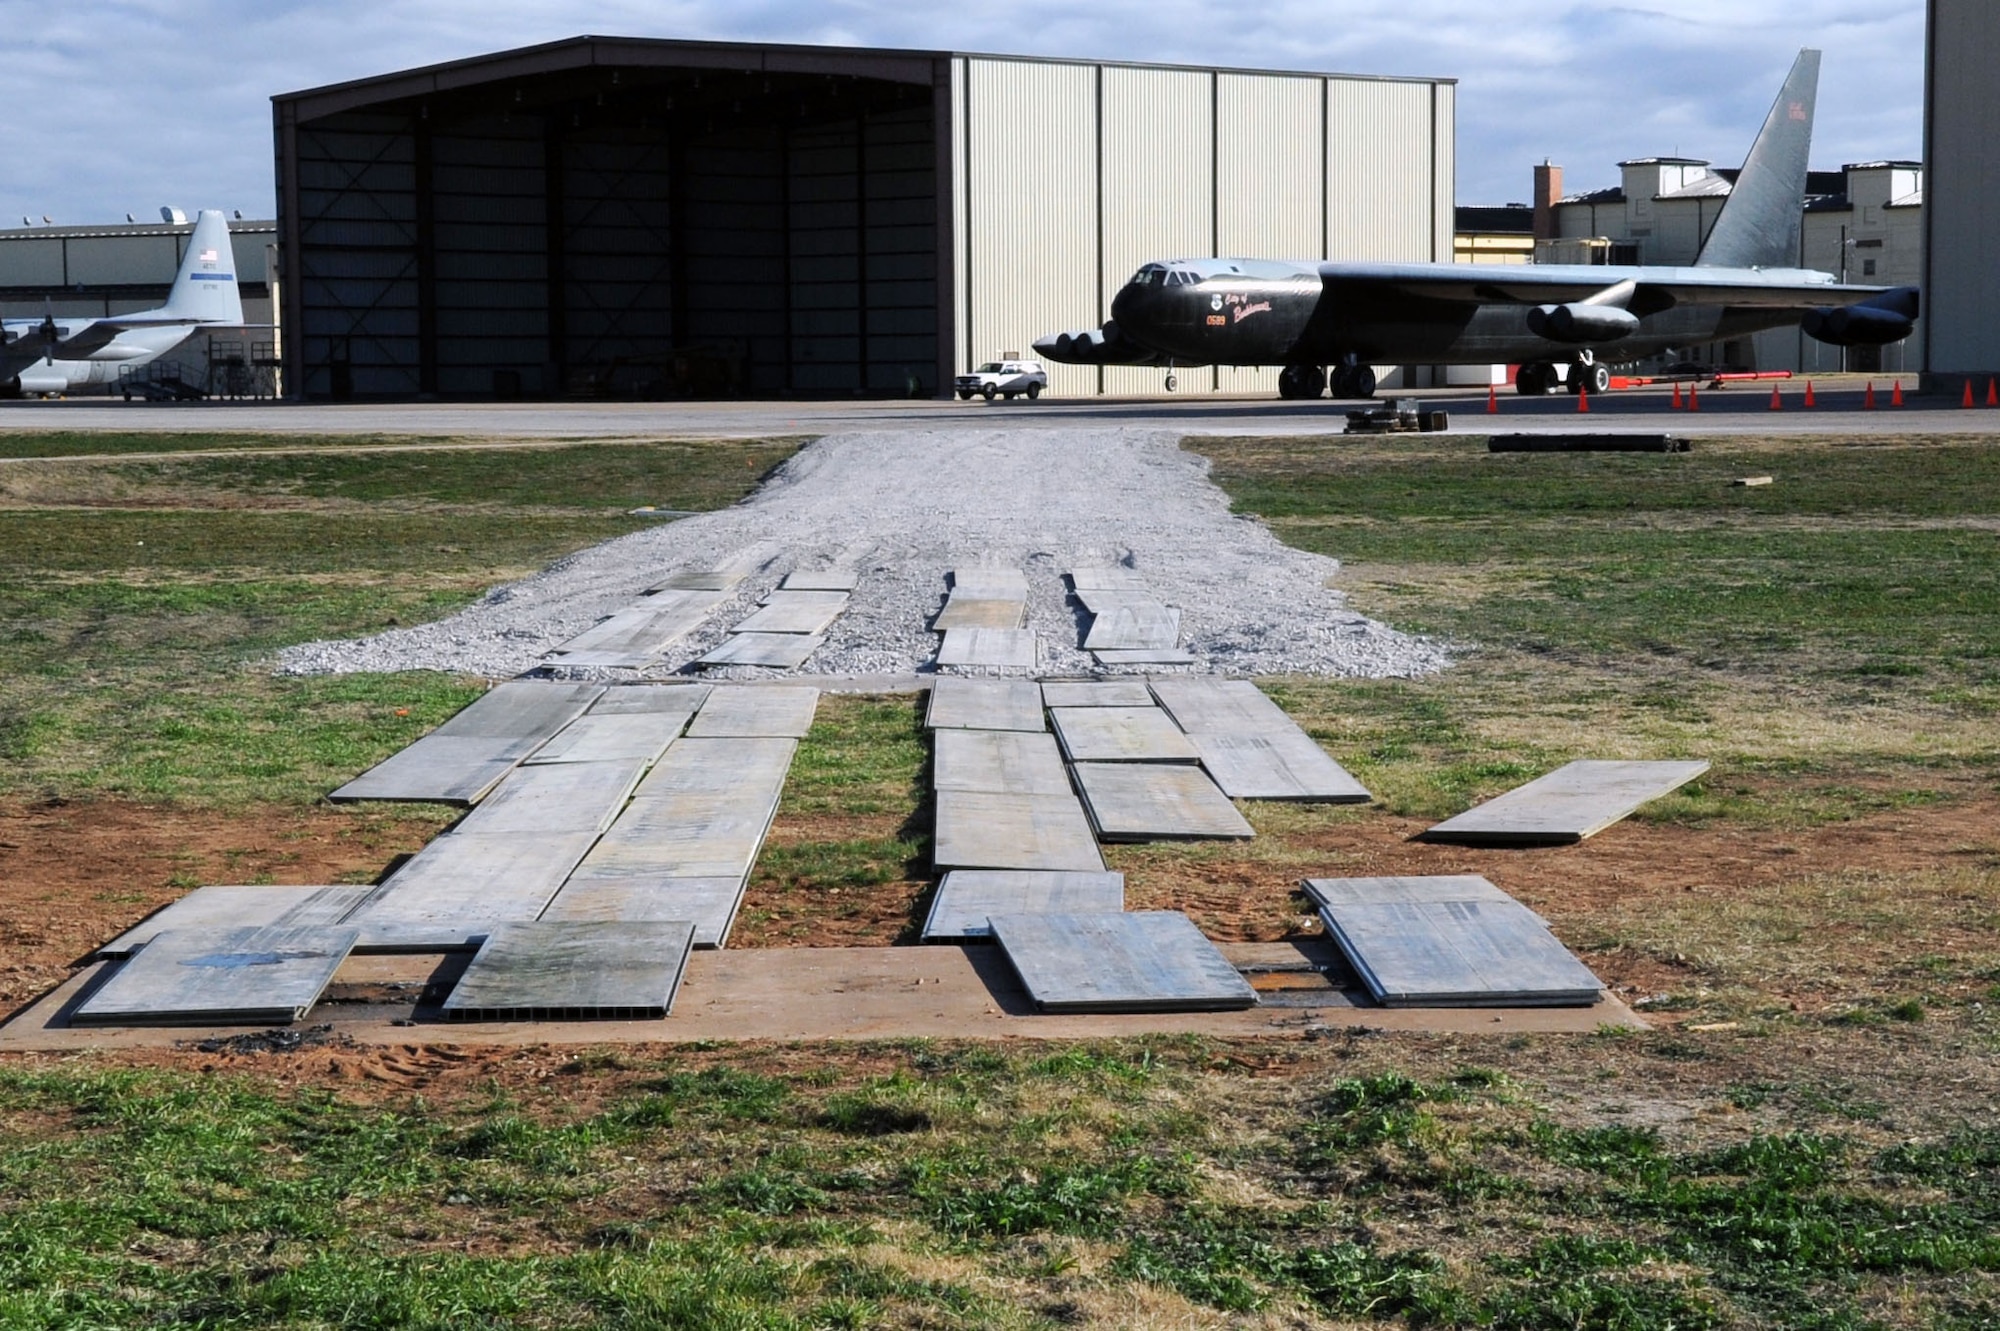 The “City of Burkburnett” B-52 has been removed from where it has sat since 1991, and waits in the background for transport to its new location.  The B-52 is being replaced with a newer model due to years of outdoor elements making the plane structurally unstable. (U.S. Air Force Photo/ Josh Wilson)